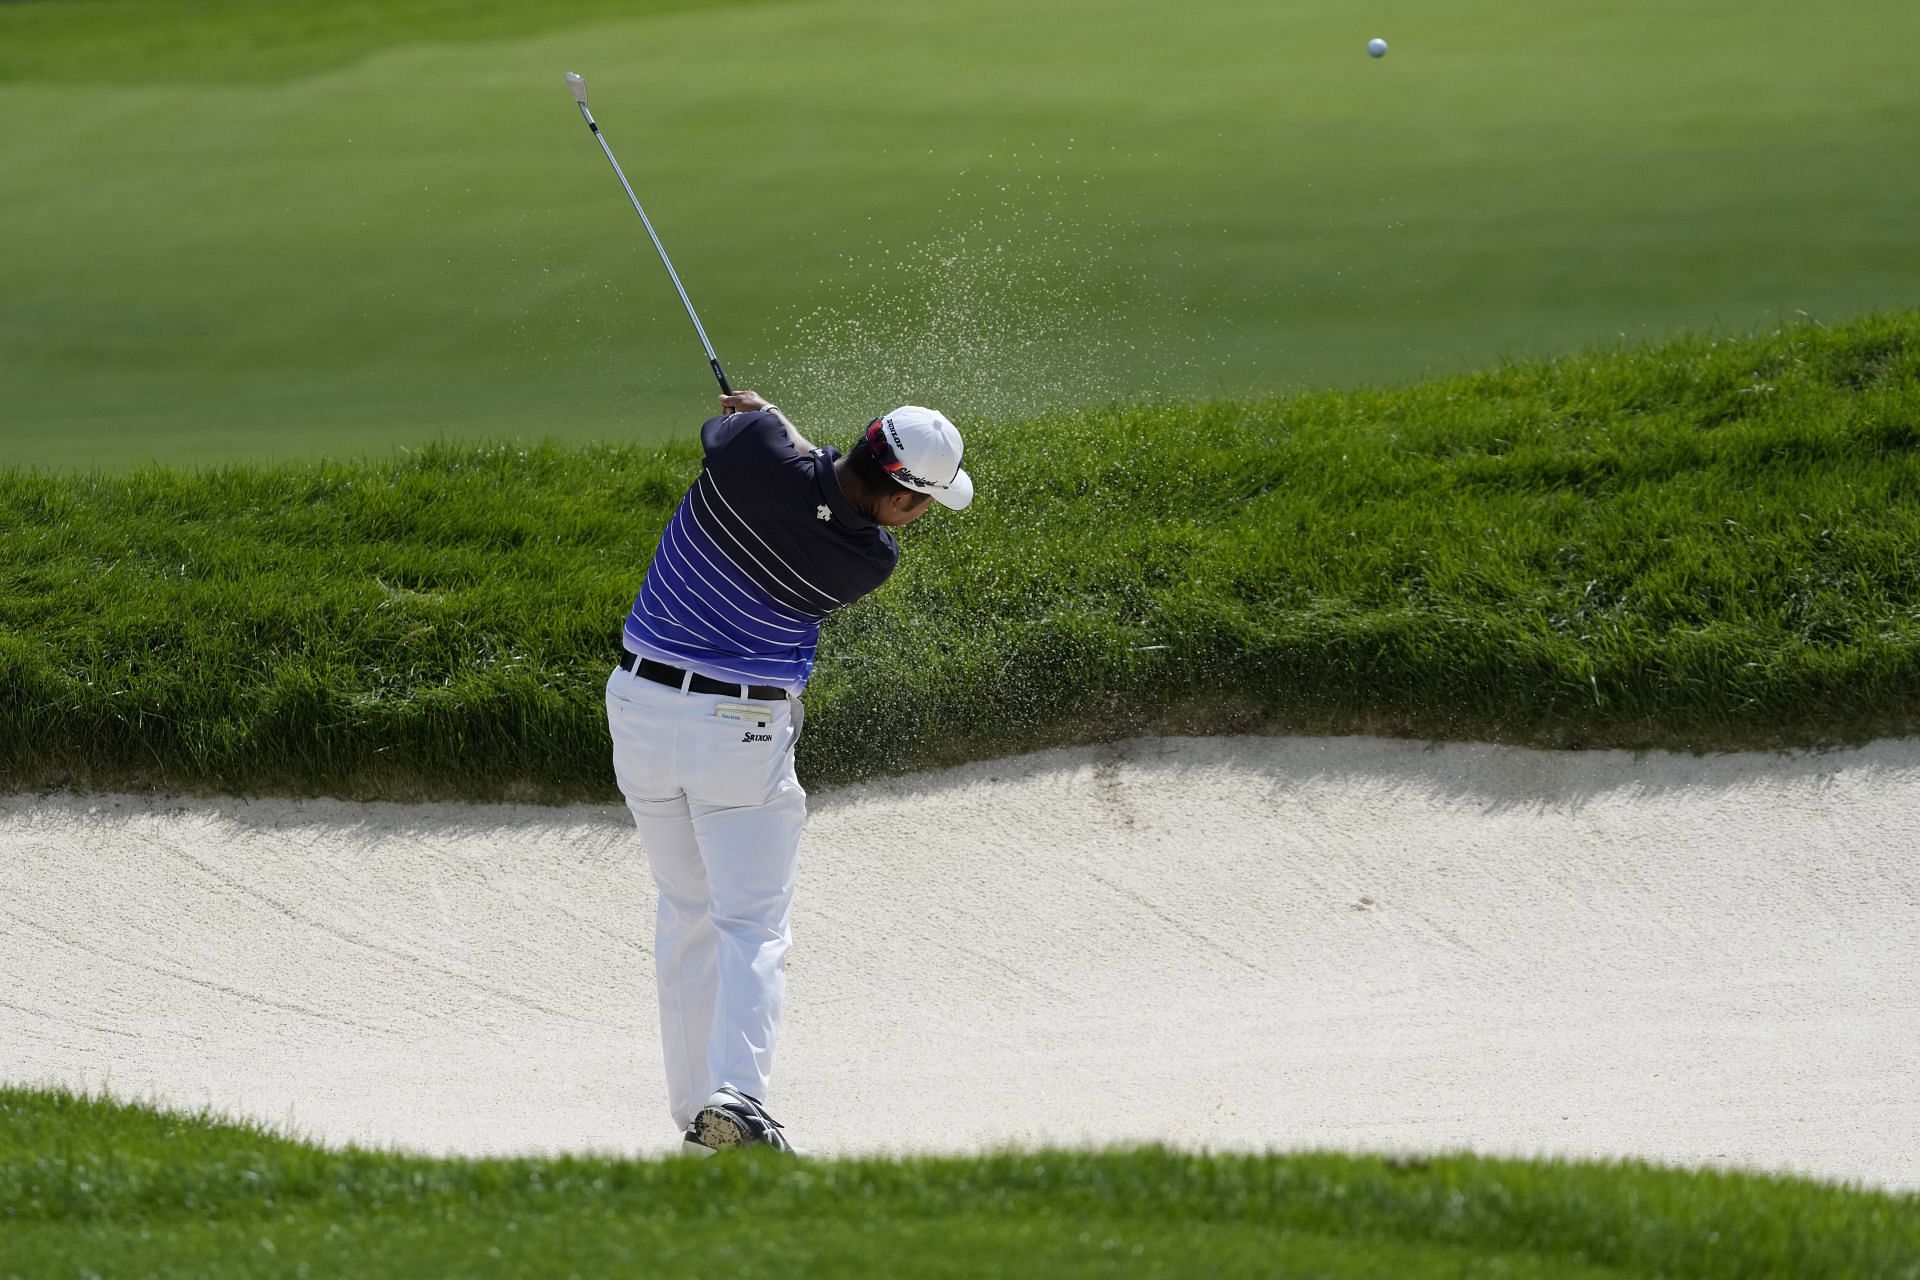 Hideki Matsuyama clears the far wall of a bunker in his second attempt on the ninth fairway during the first round of the 2023 BMW Championship